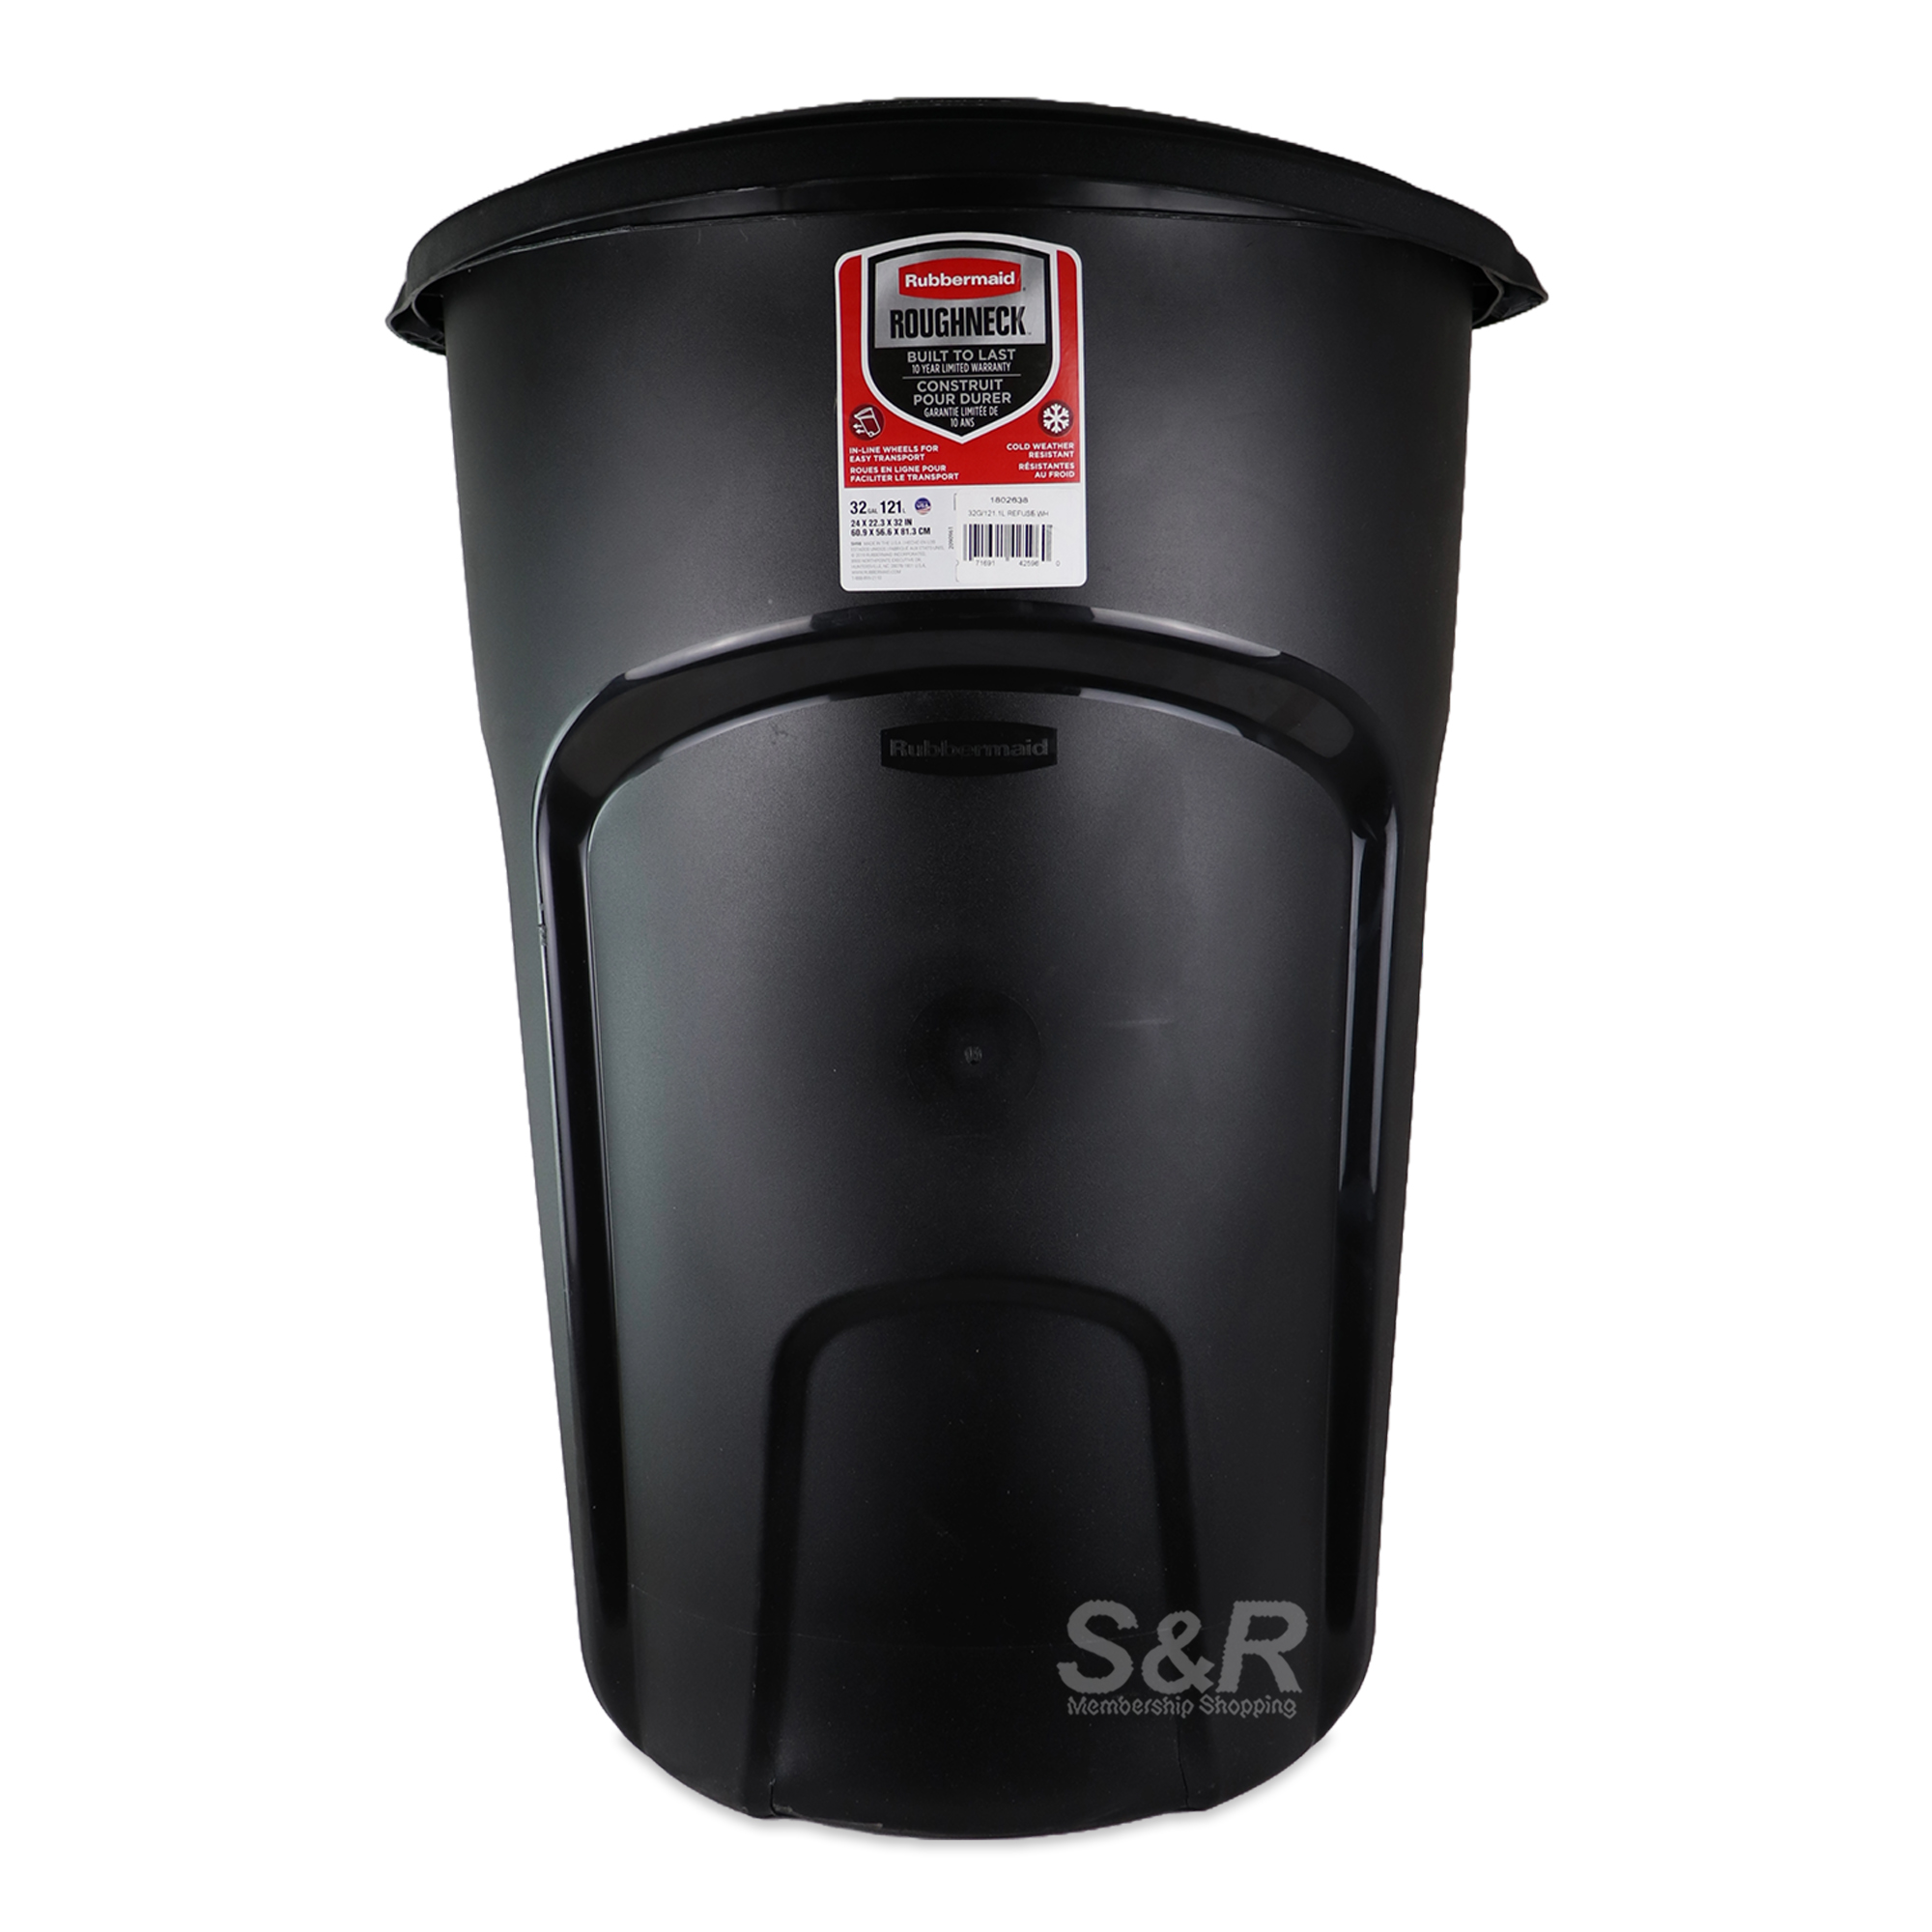 Rubbermaid Roughneck Trash Can 24x22.3x32in 121L